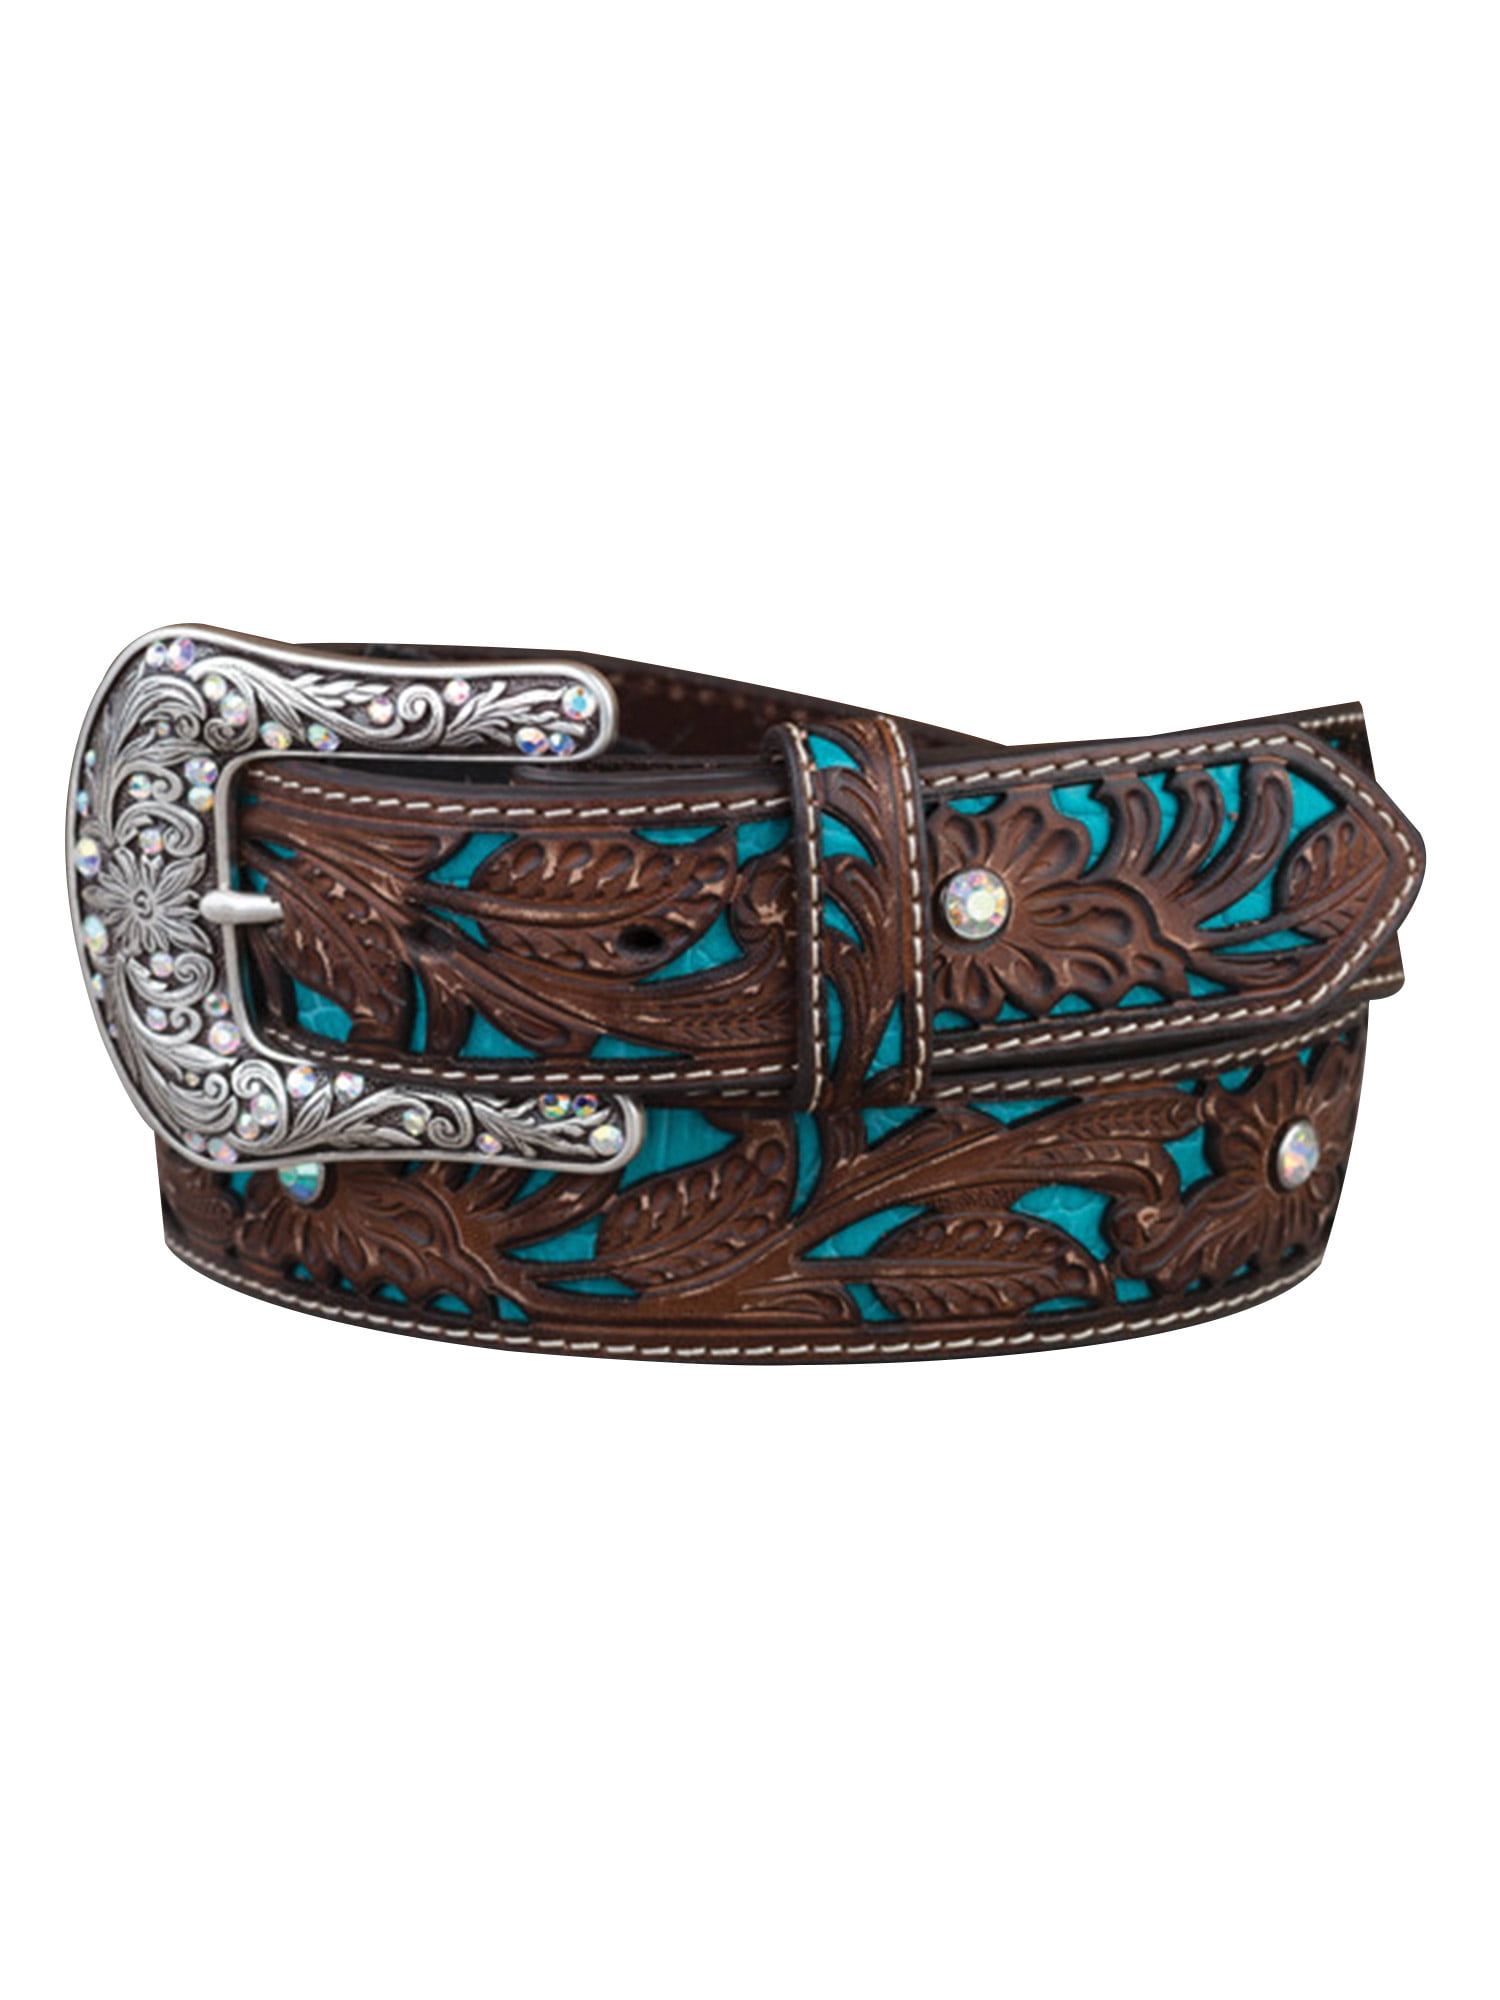 Ariat Western Mens Belt Leather Floral Embossed Overlay Turq Brown A1030002 